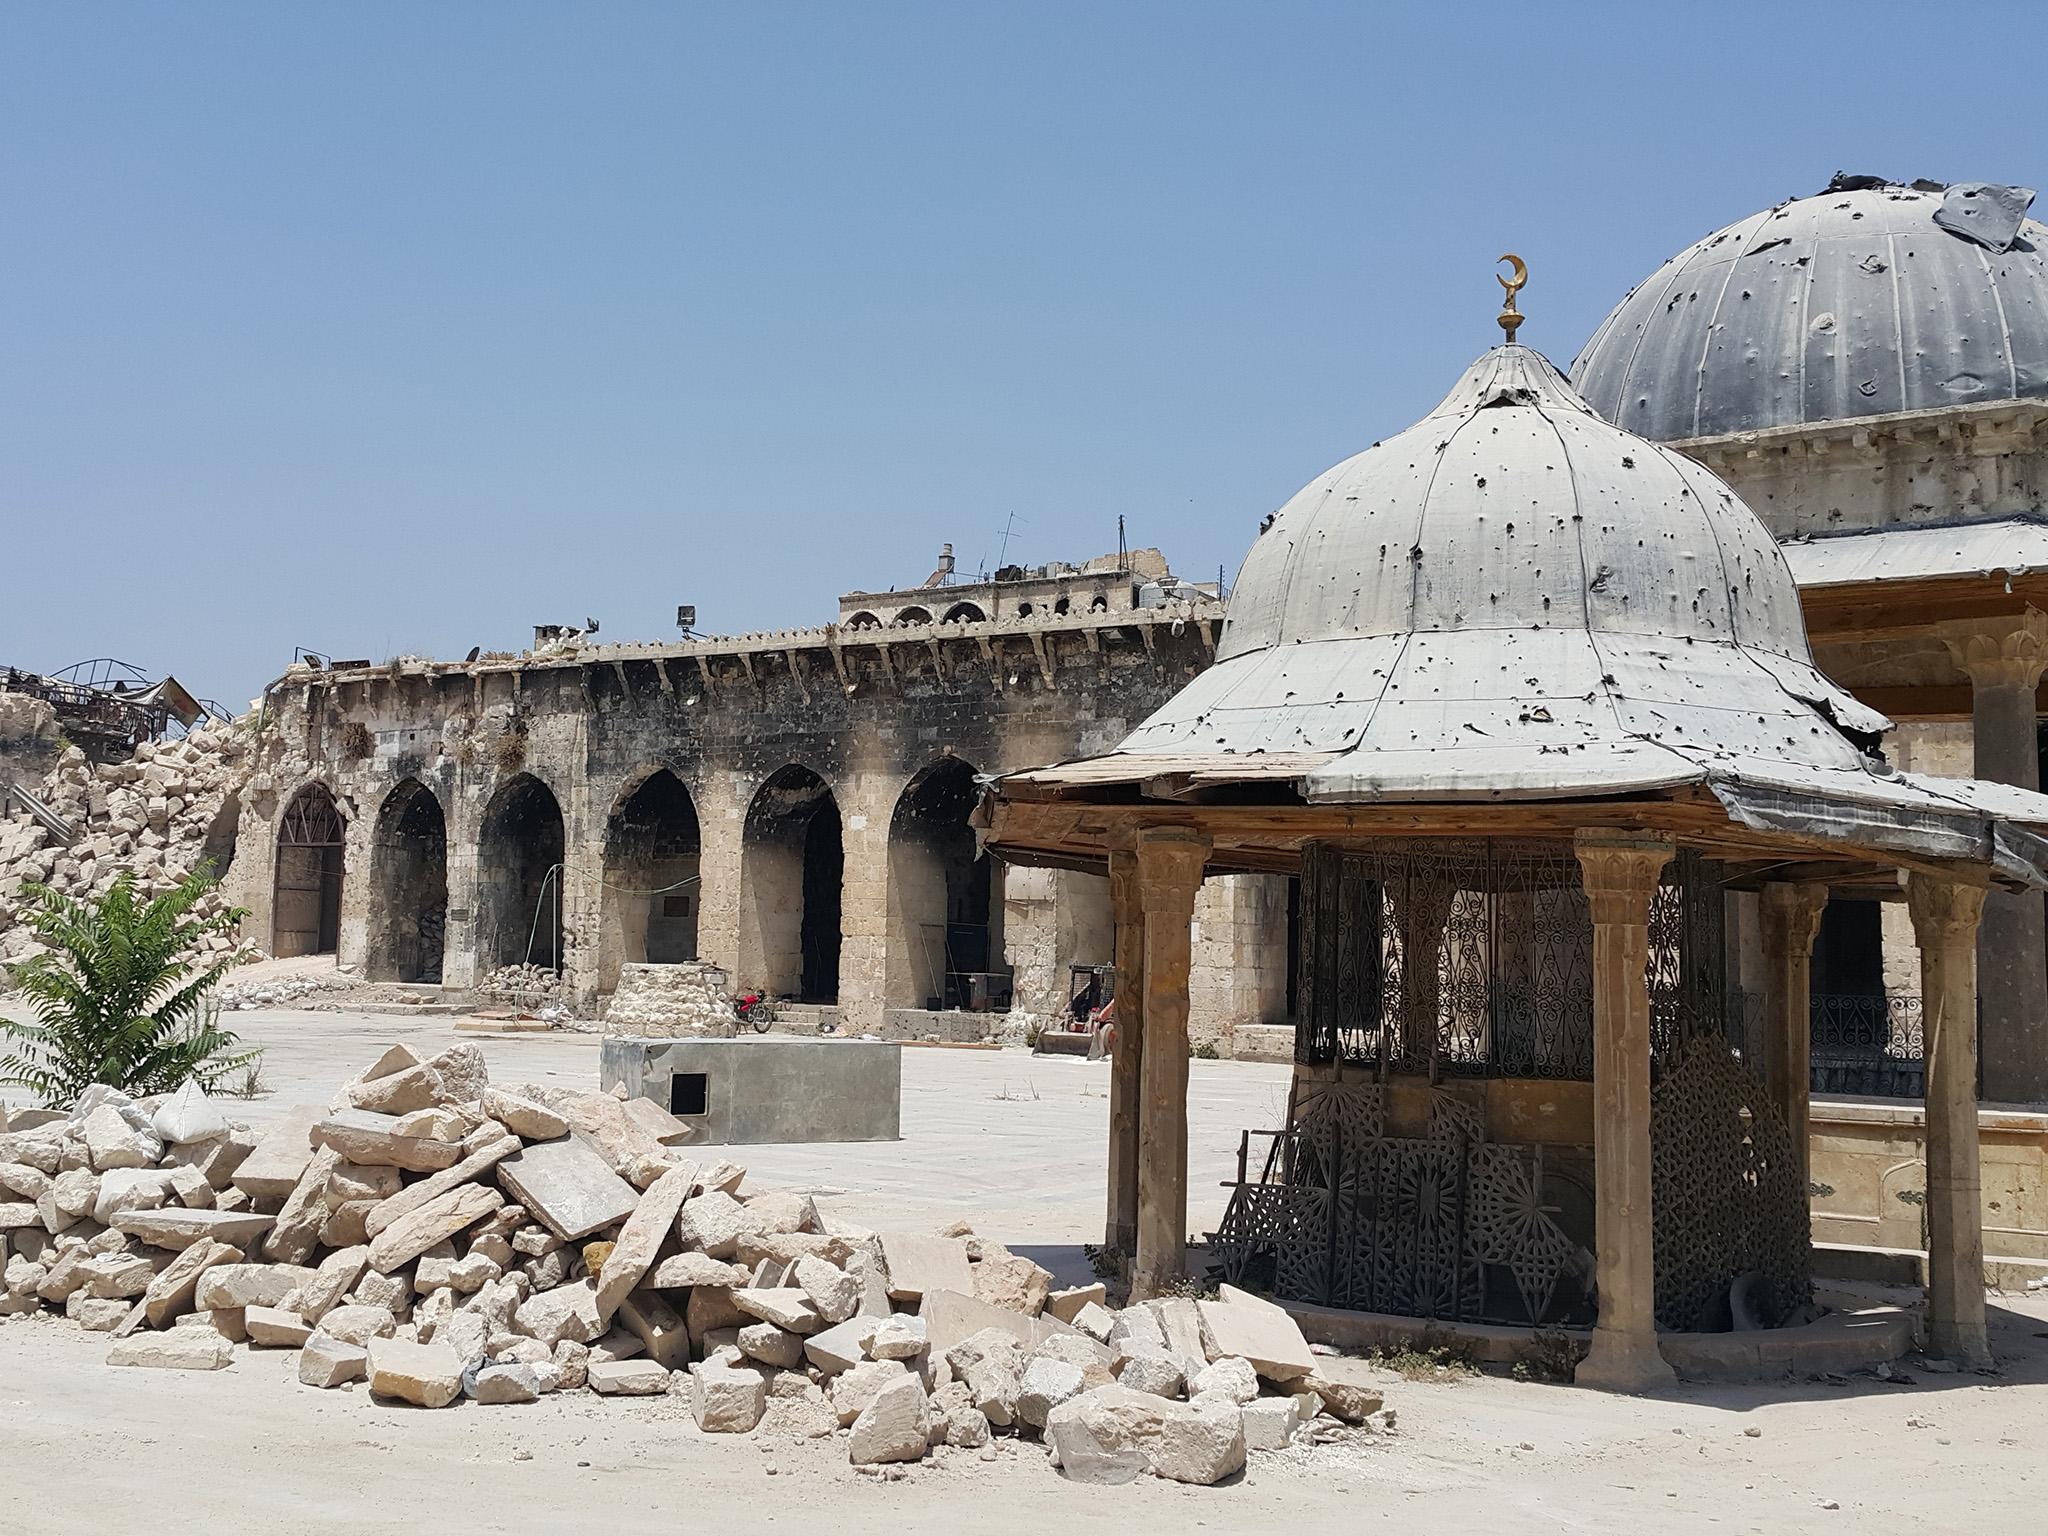 &#13;
Rubble in the courtyard of the Great Mosque with stone remains of the minaret far left (Photo: Nelofer Pazira)&#13;